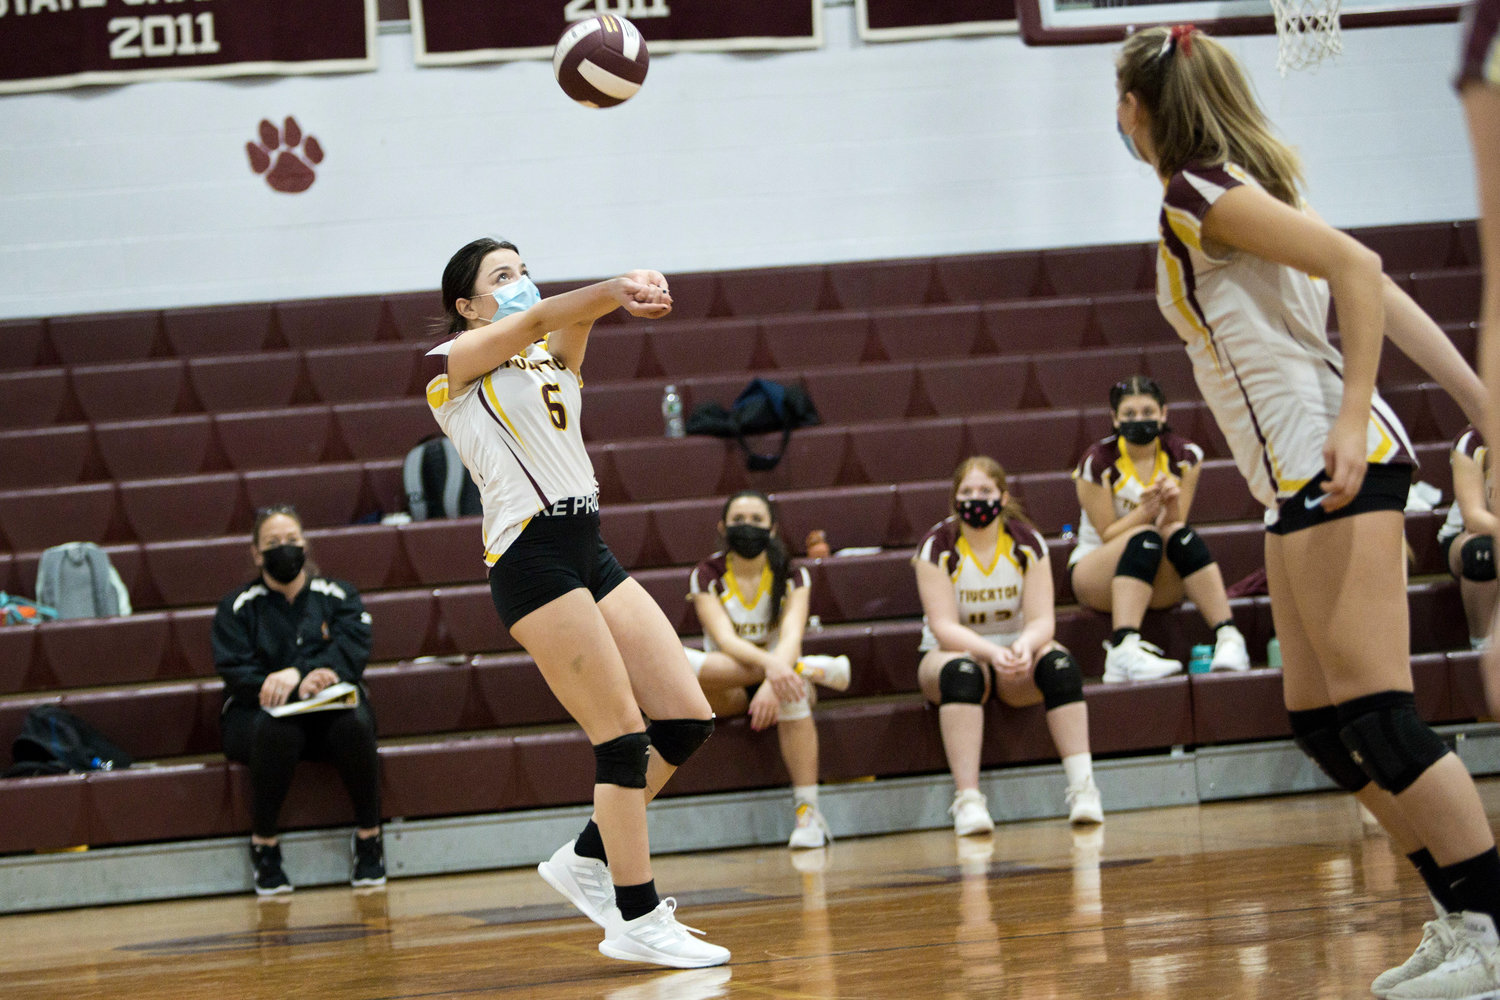 Gabby Piscani bumps the ball up for a teammate during Tuesday
night's game against Paul Cuffee School.